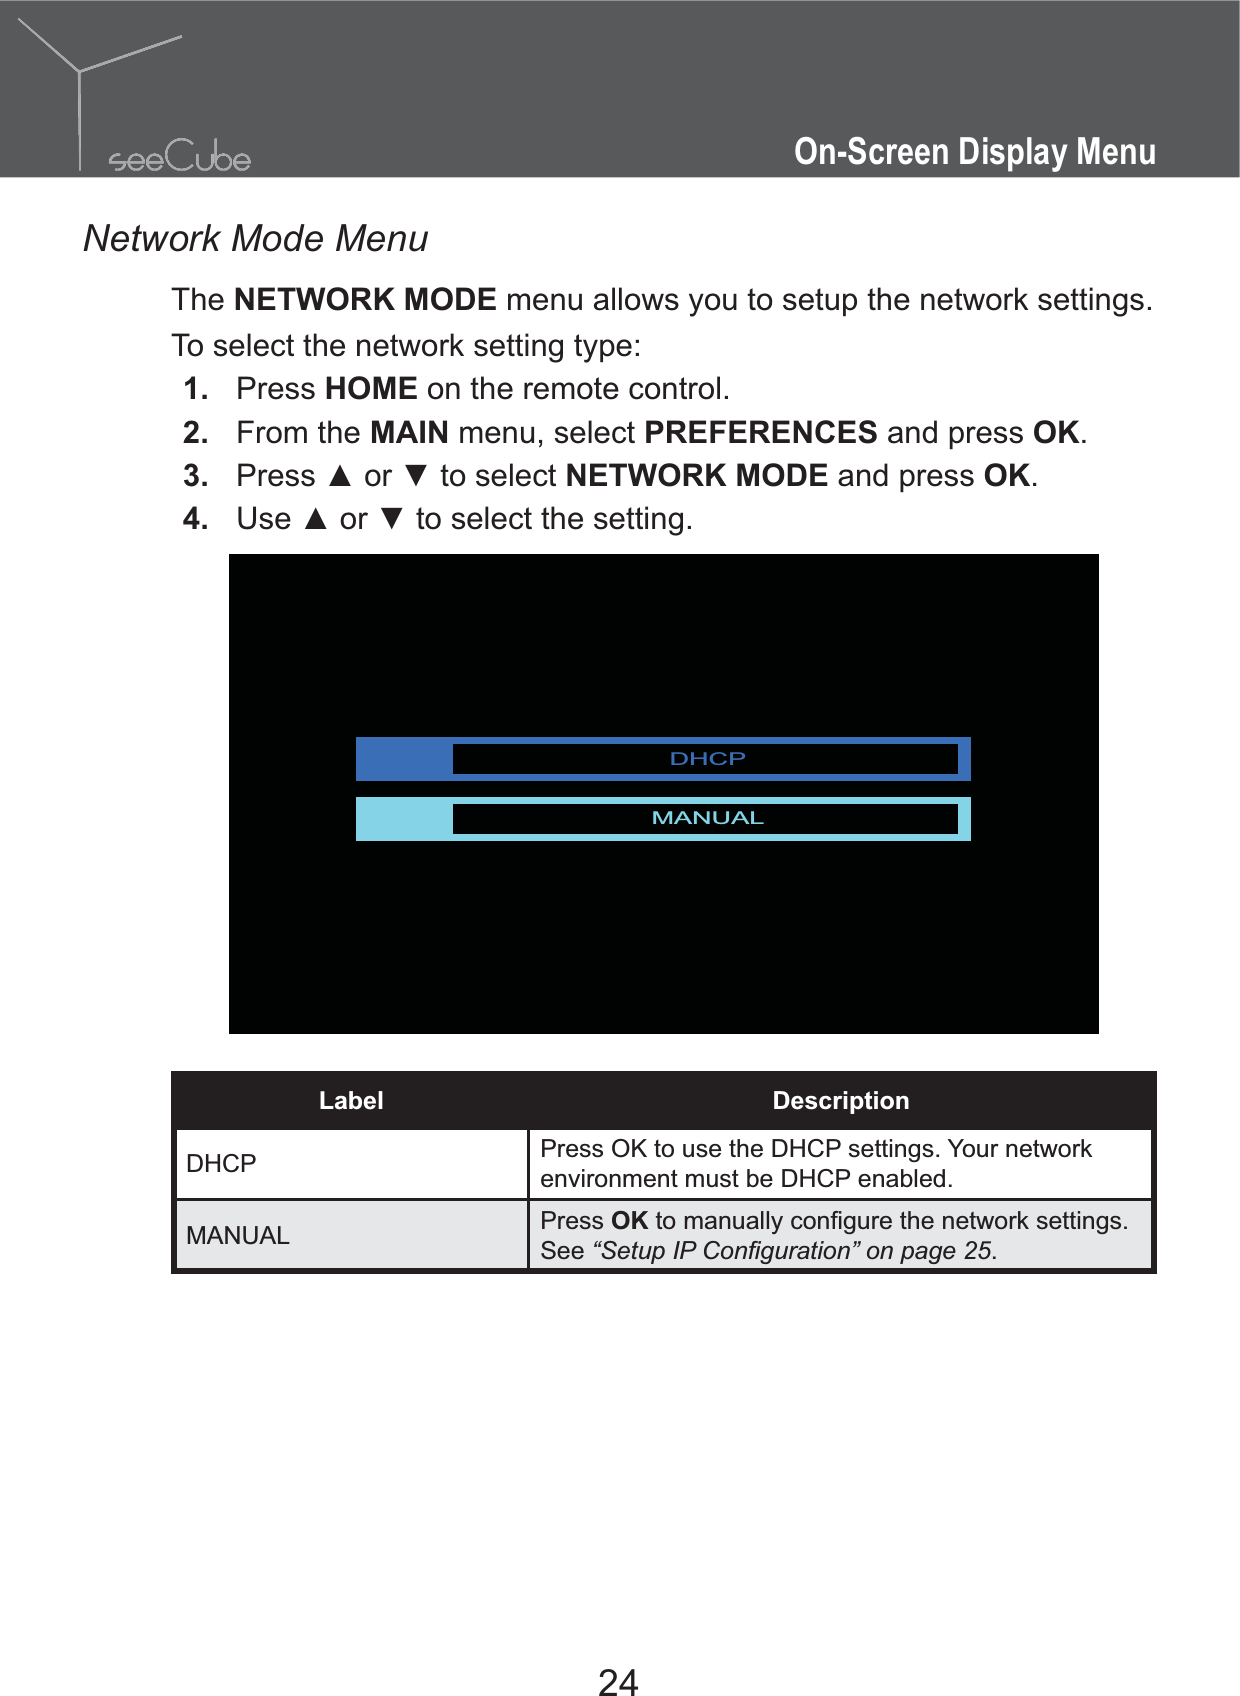 24On-Screen Display MenuNetwork Mode MenuThe NETWORK MODE menu allows you to setup the network settings. To select the network setting type:1.  Press HOME on the remote control.2.  From the MAIN menu, select PREFERENCES and press OK.3.  NETWORK MODE and press OK.4.  DHCPMANUALLabel DescriptionDHCP Press OK to use the DHCP settings. Your network environment must be DHCP enabled.MANUAL Press OKSee .